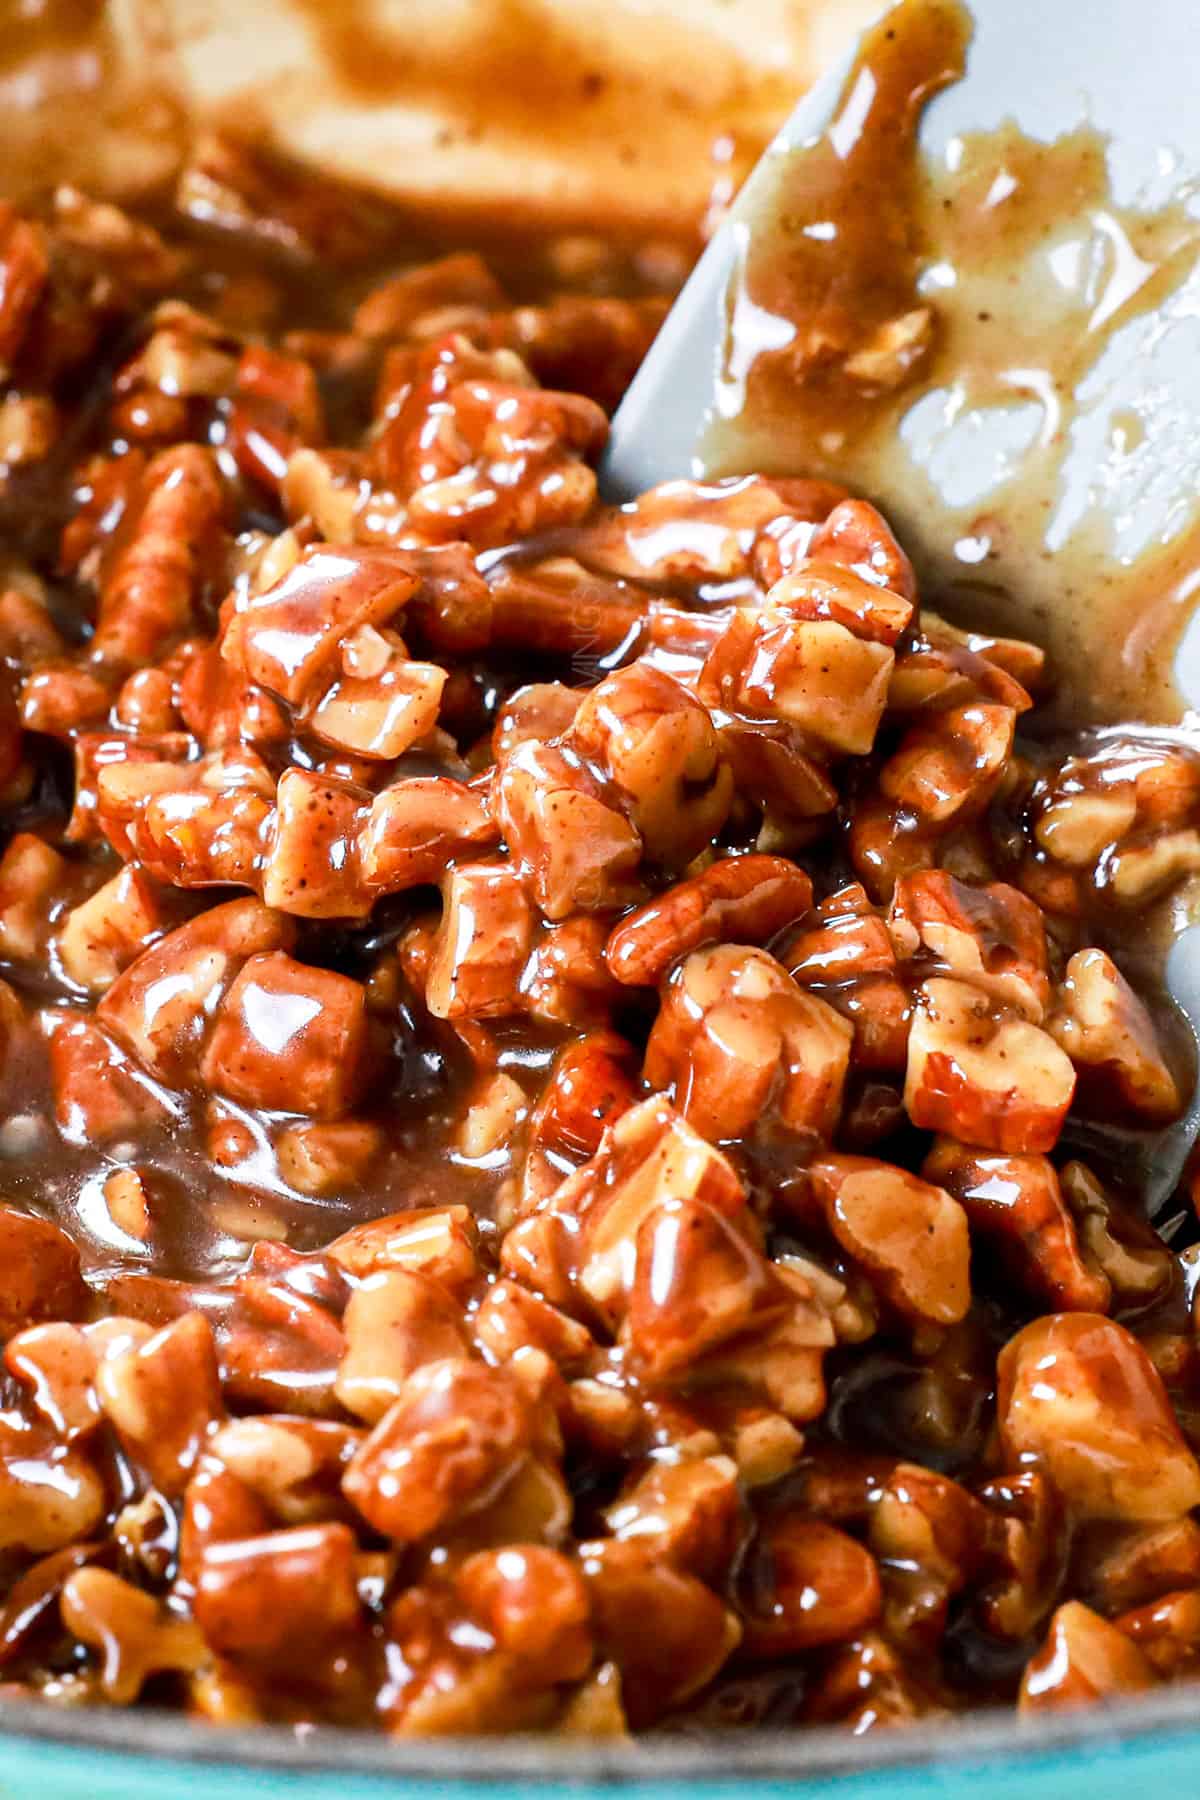 showing how to make pecan cookies with thumbprints by mixing the pecans with the caramel-like sauce